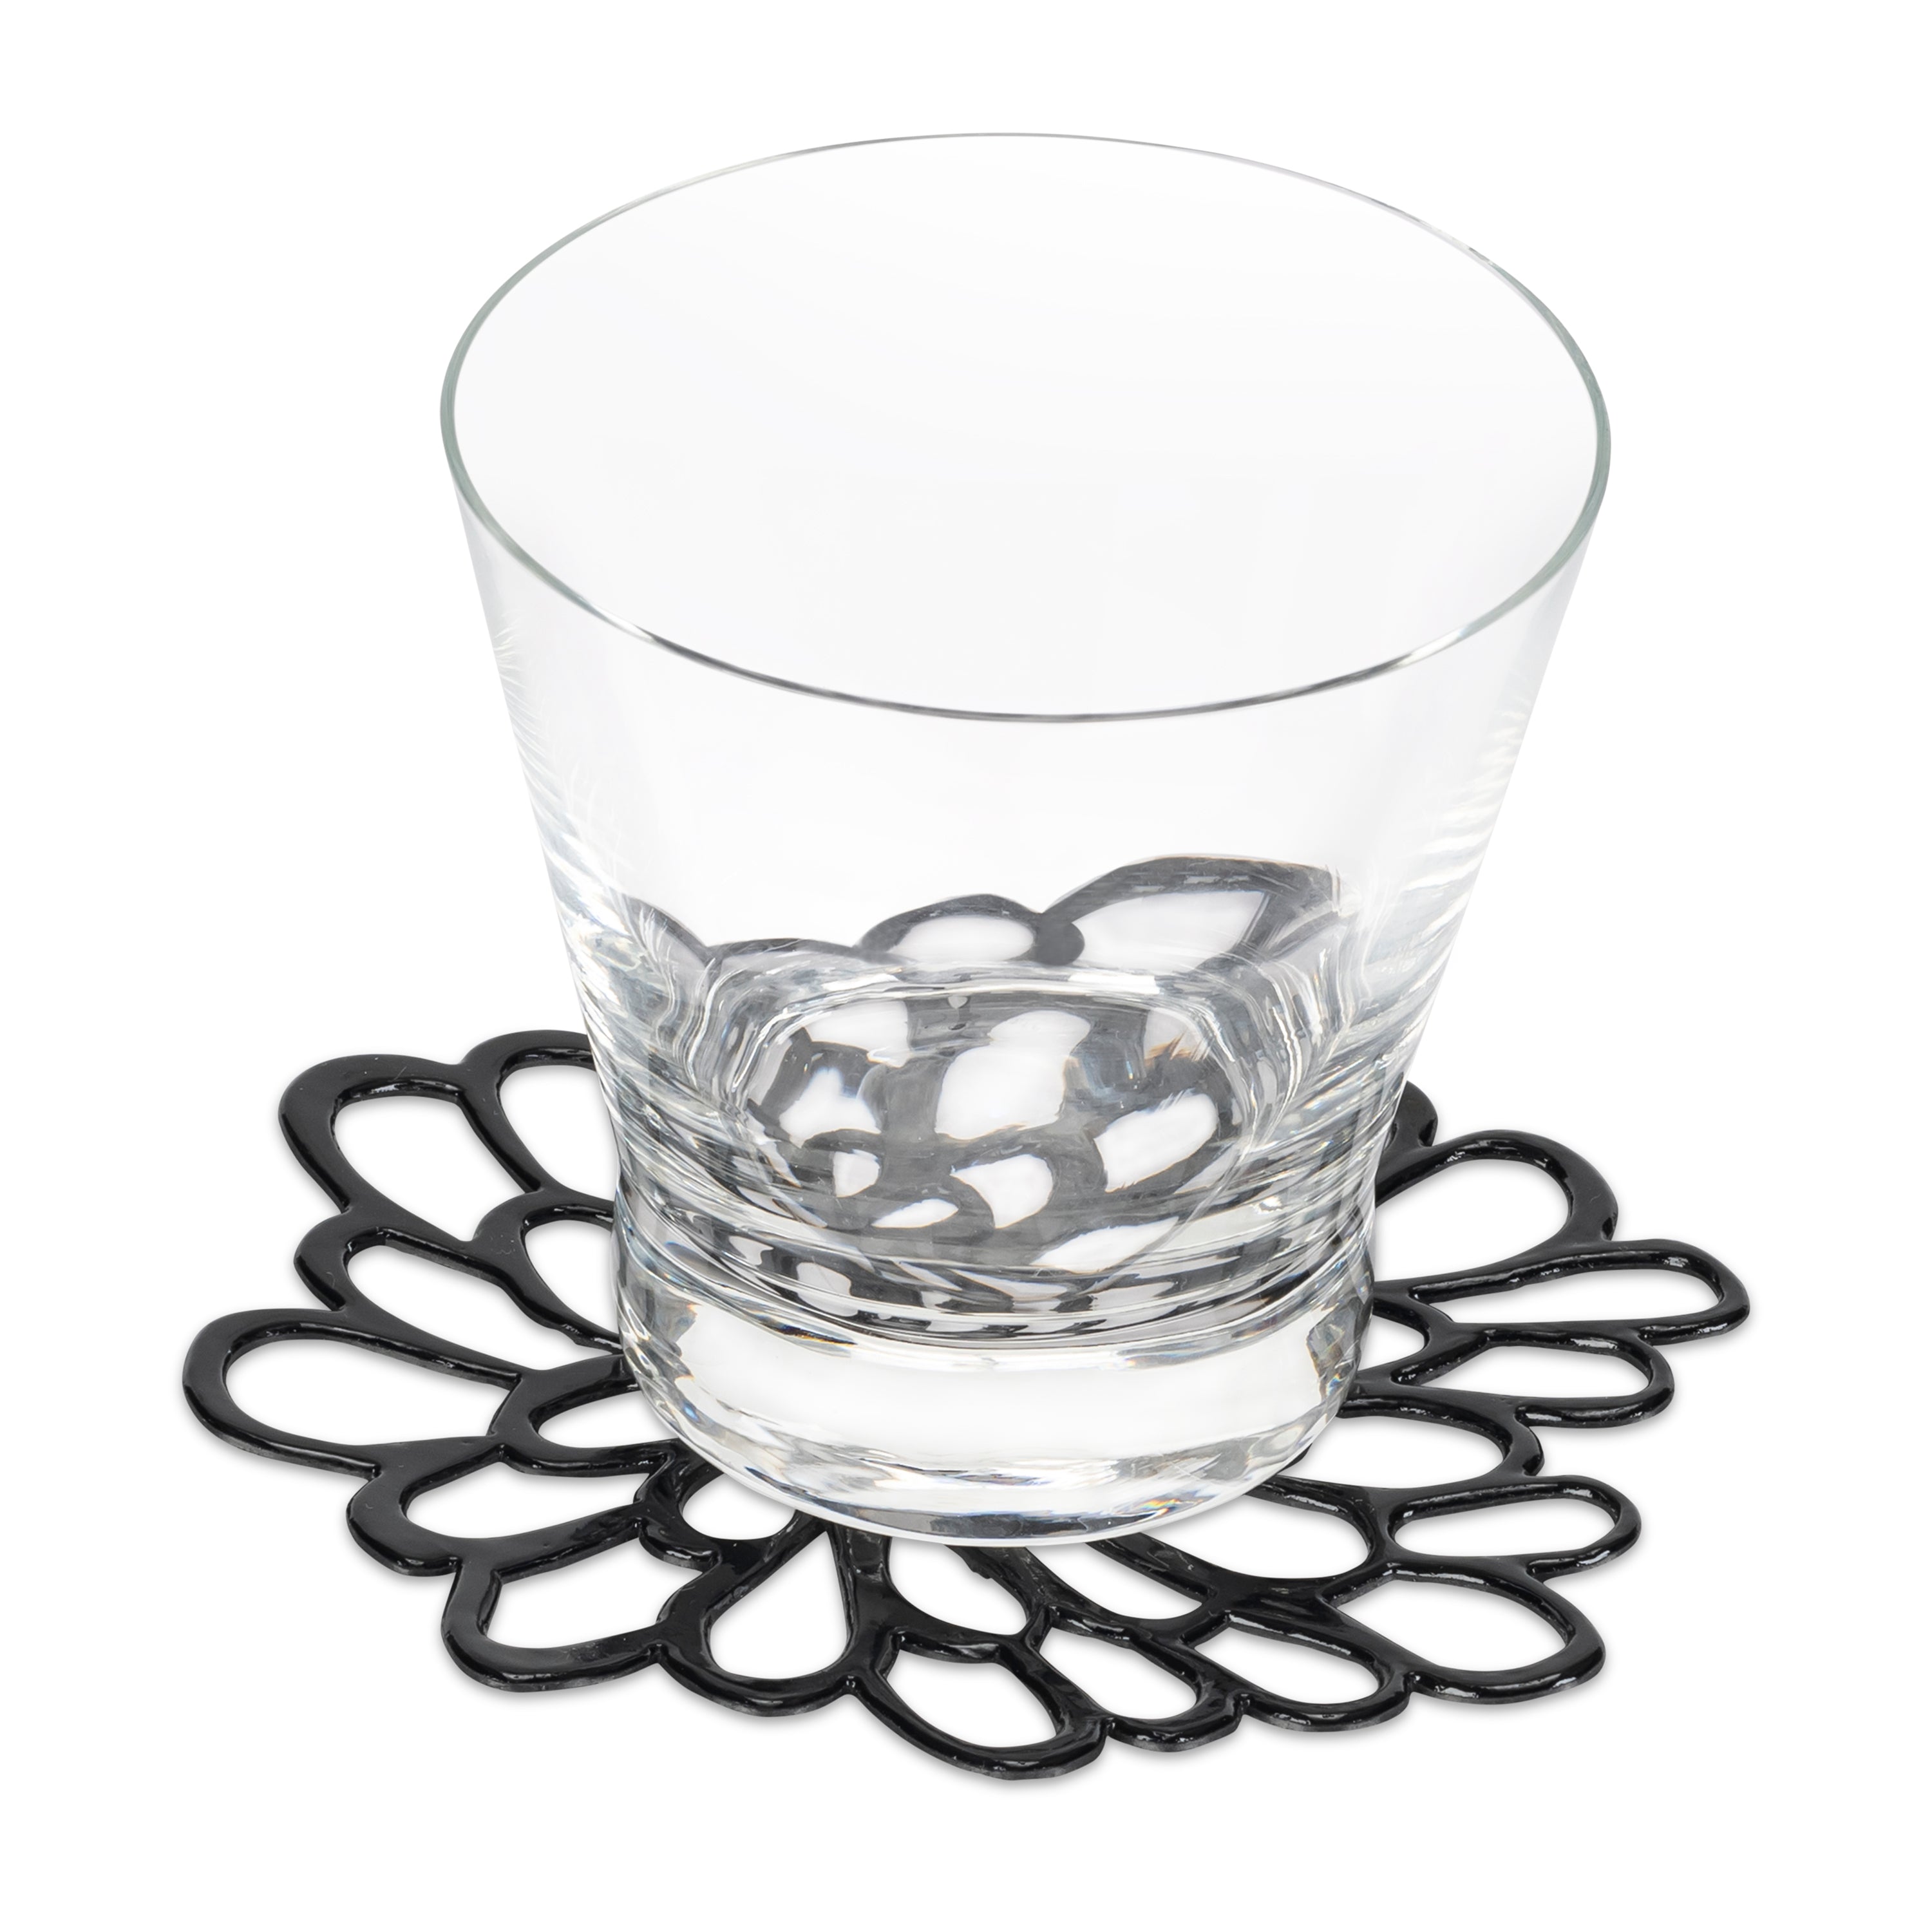 LACEMAT COASTER GLOSSY BLACK